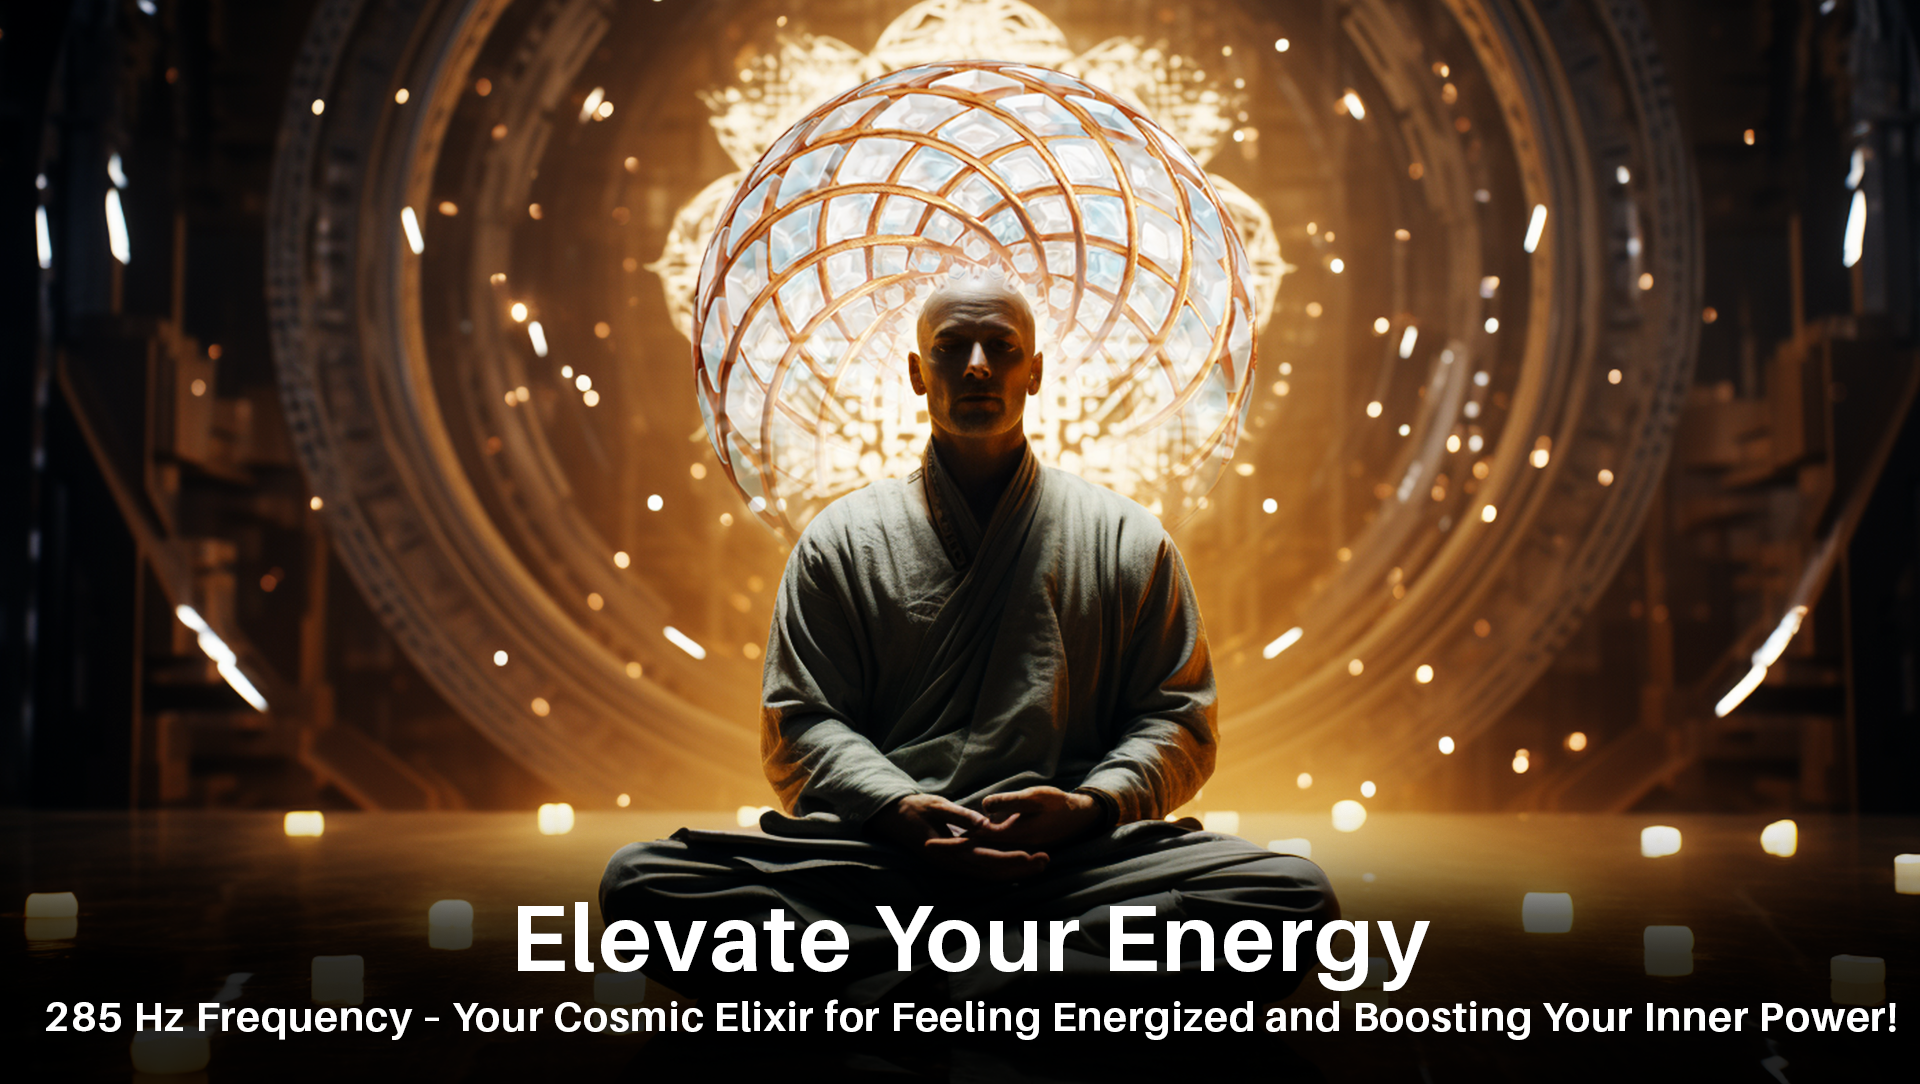 Elevate Your Energy: 285 Hz Frequency – Your Cosmic Elixir for Feeling Energized and Boosting Your Inner Power!